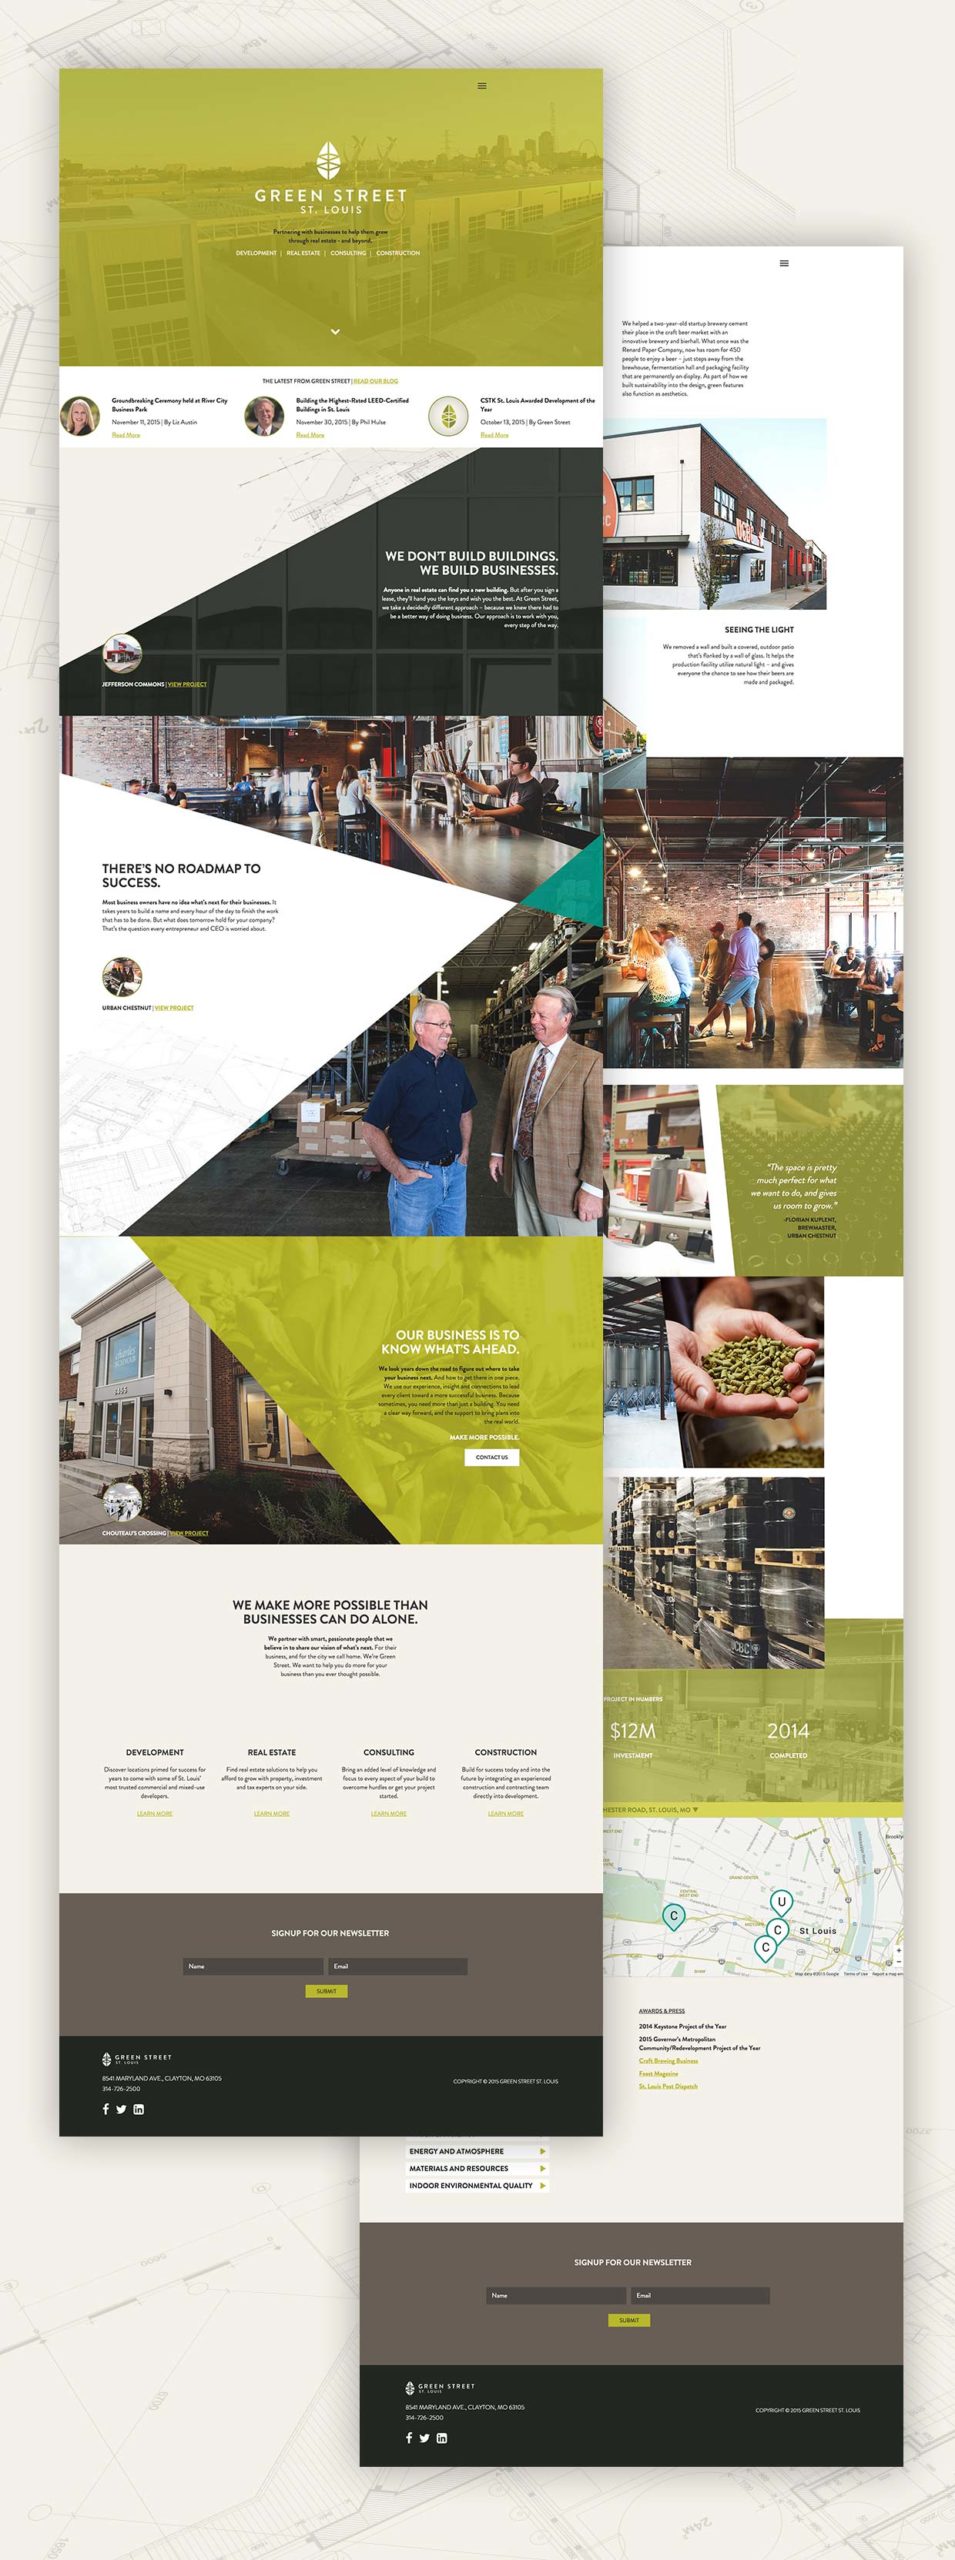 Our Website homepage design for Green Street St. Louis